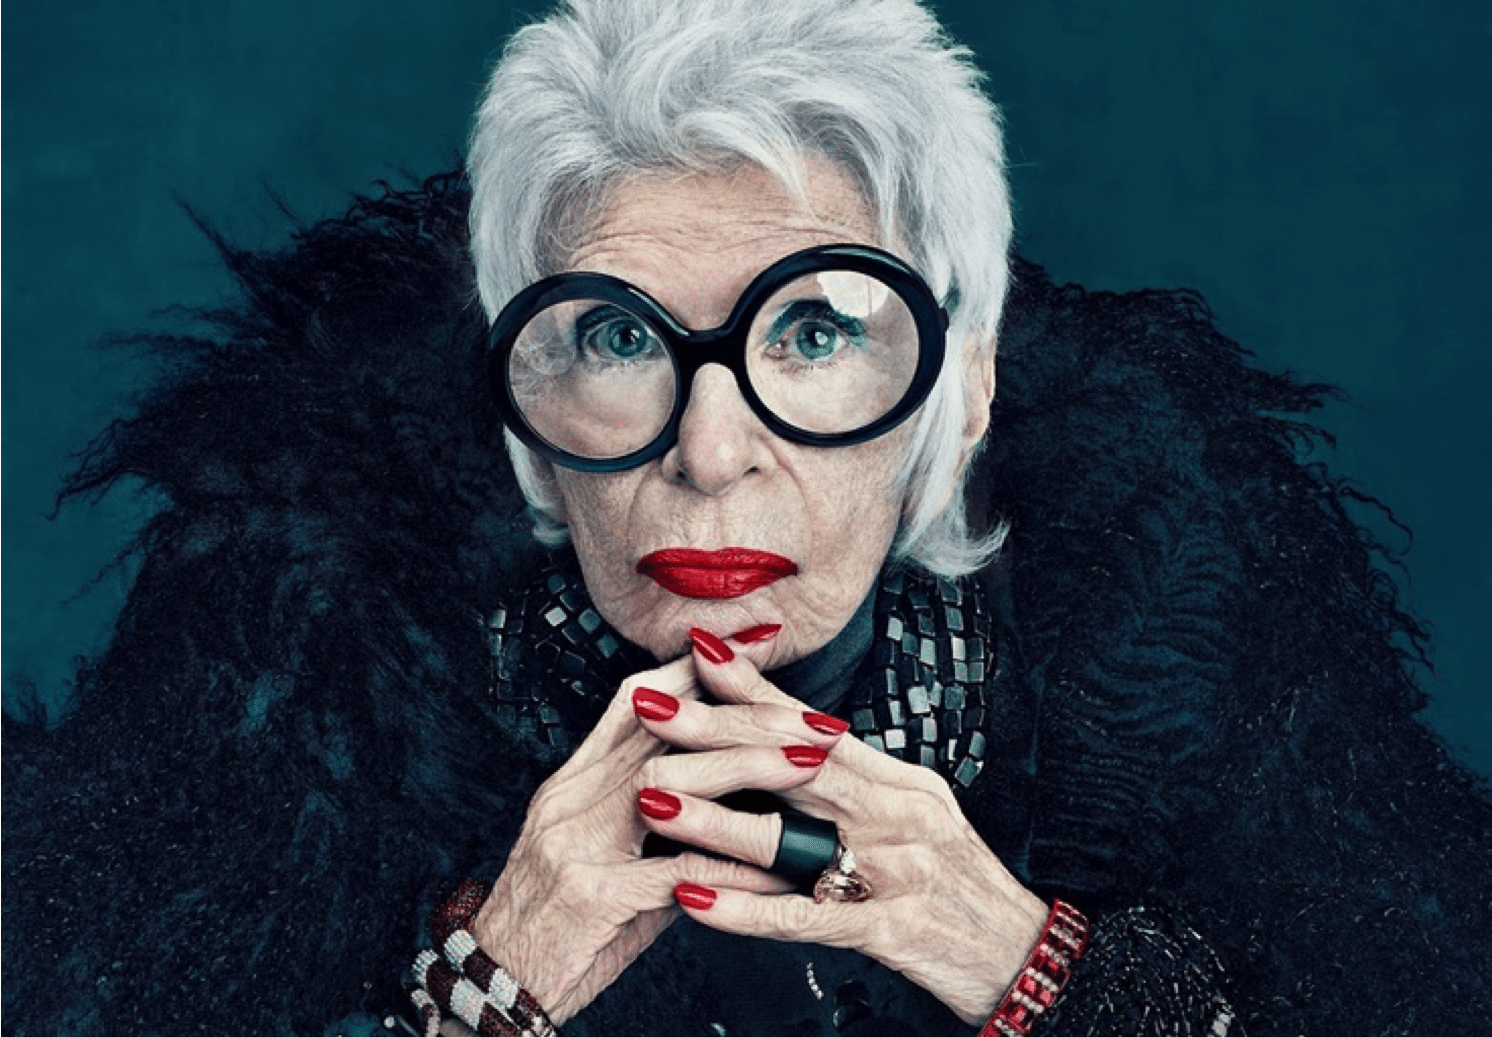 Style Icon Iris Apfel's Film Debut - Check Out The Trailer Here…